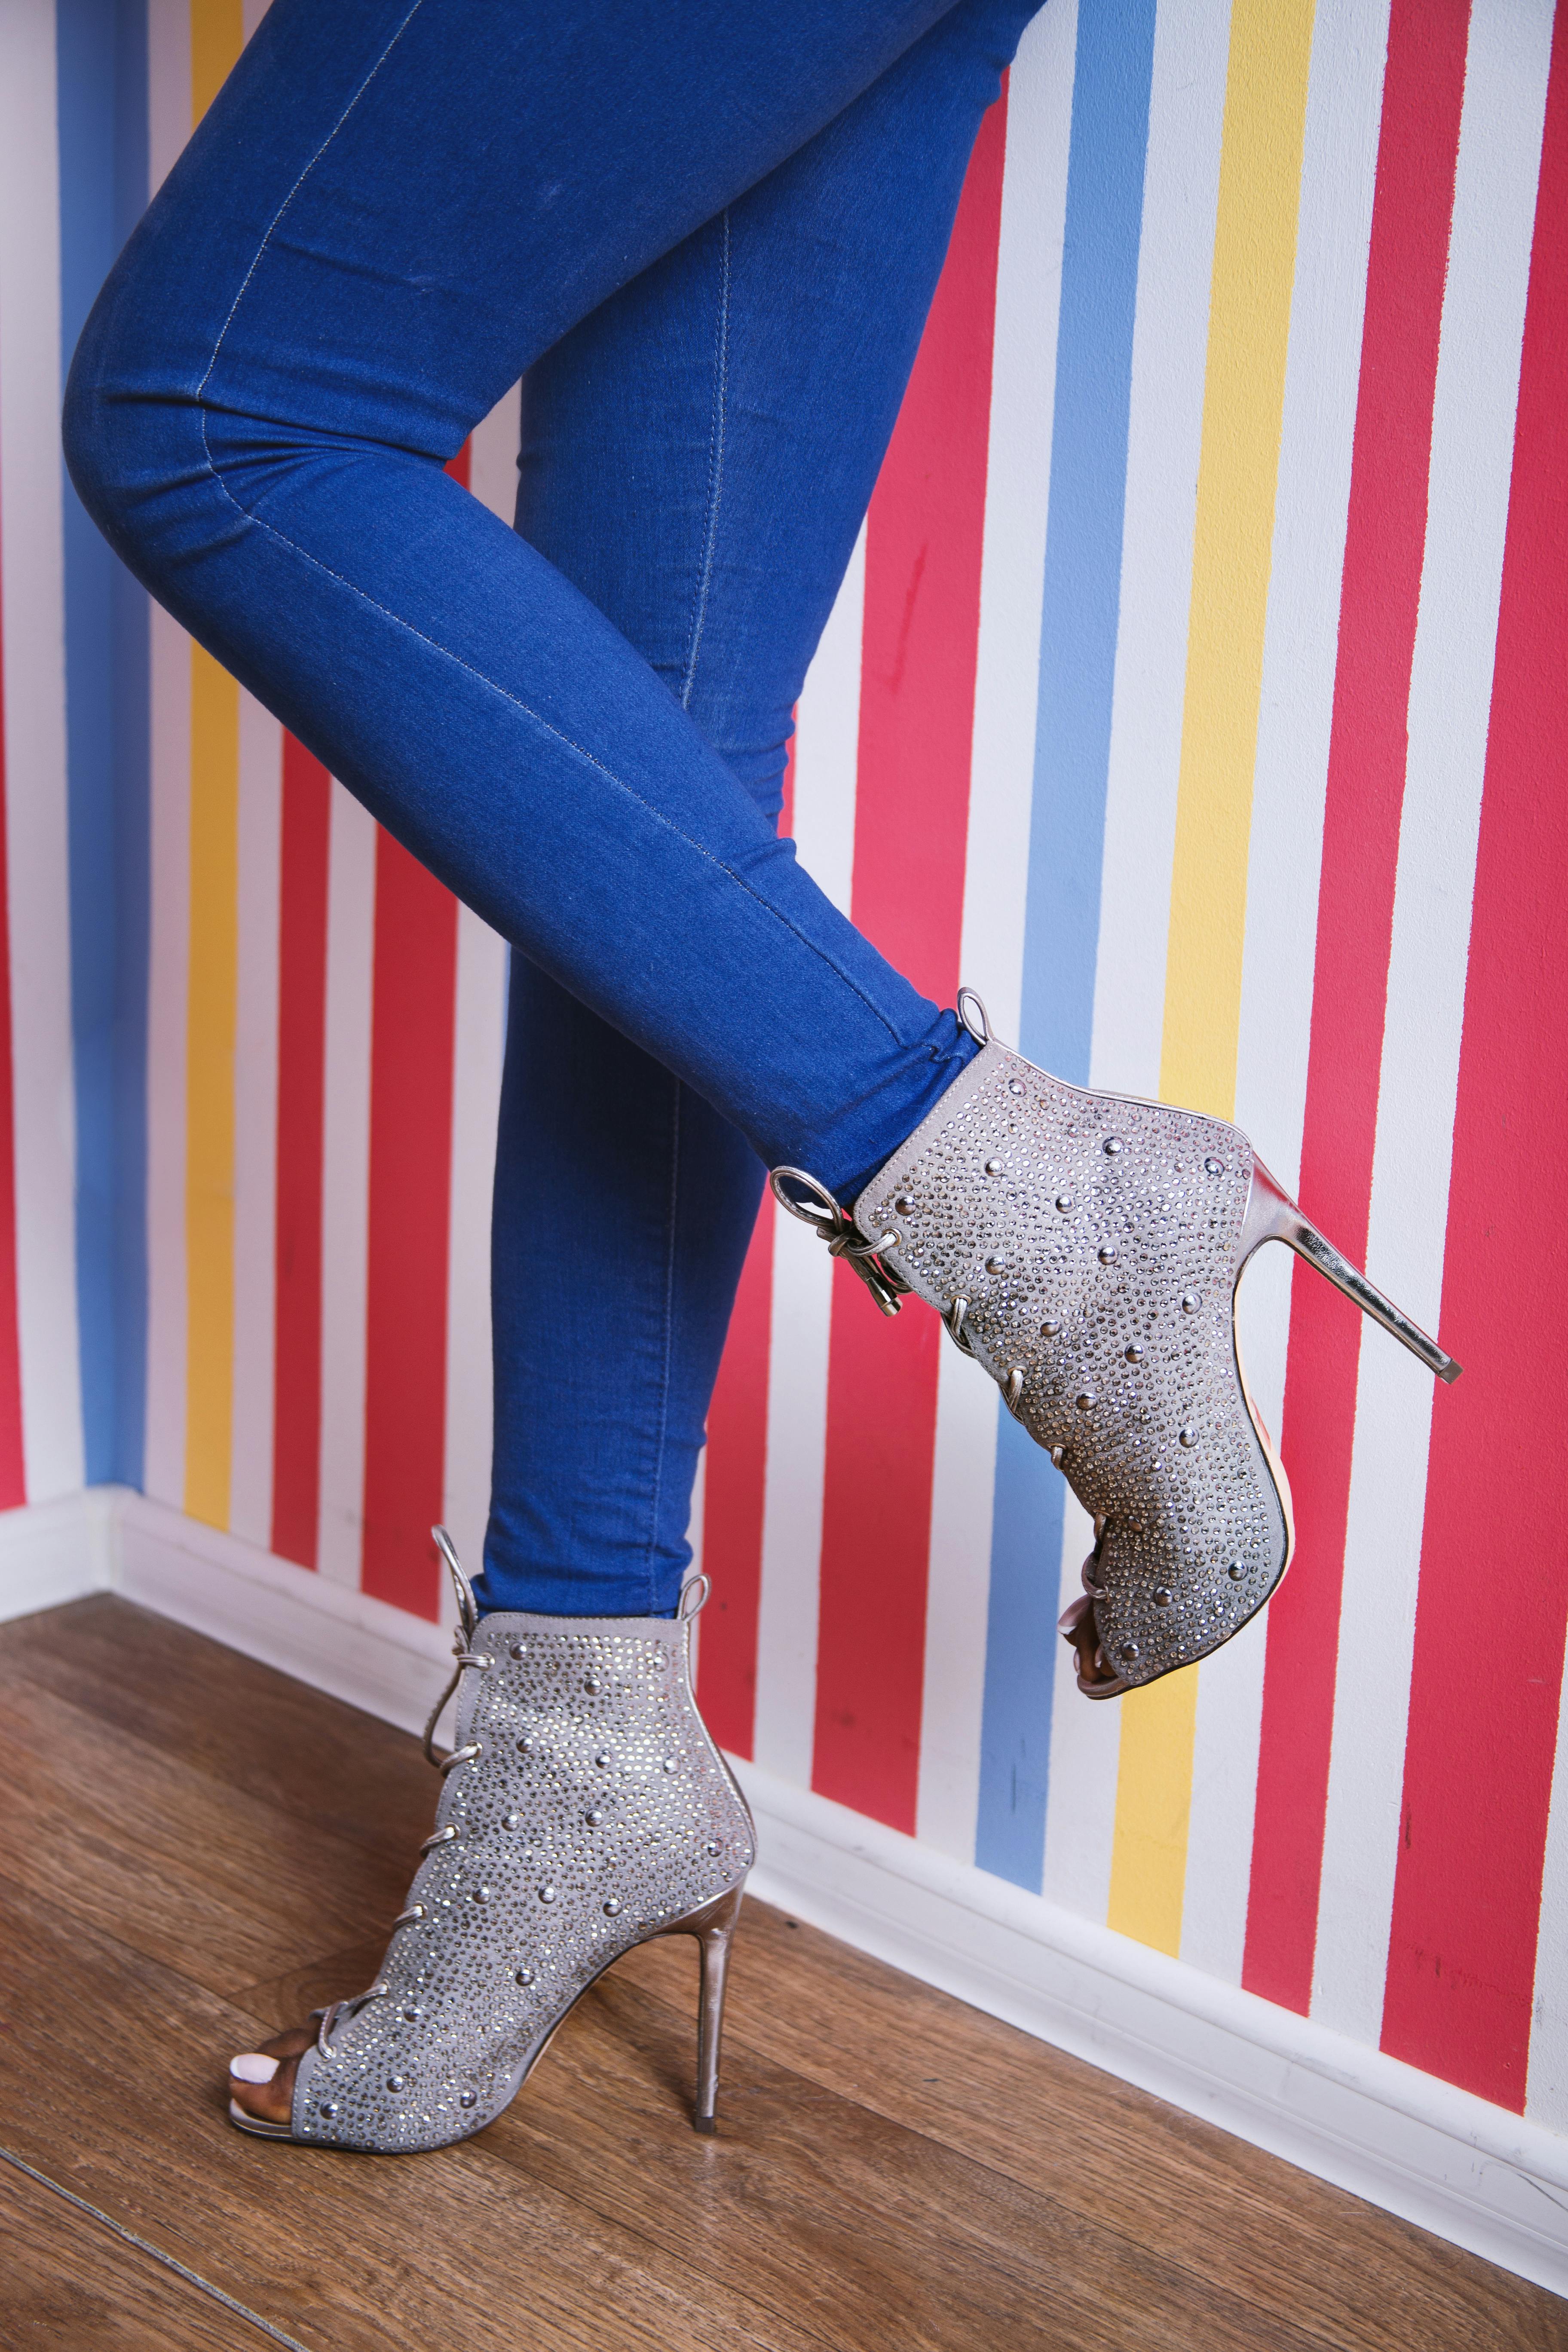 woman in blue denim jeans and gray heeled shoes